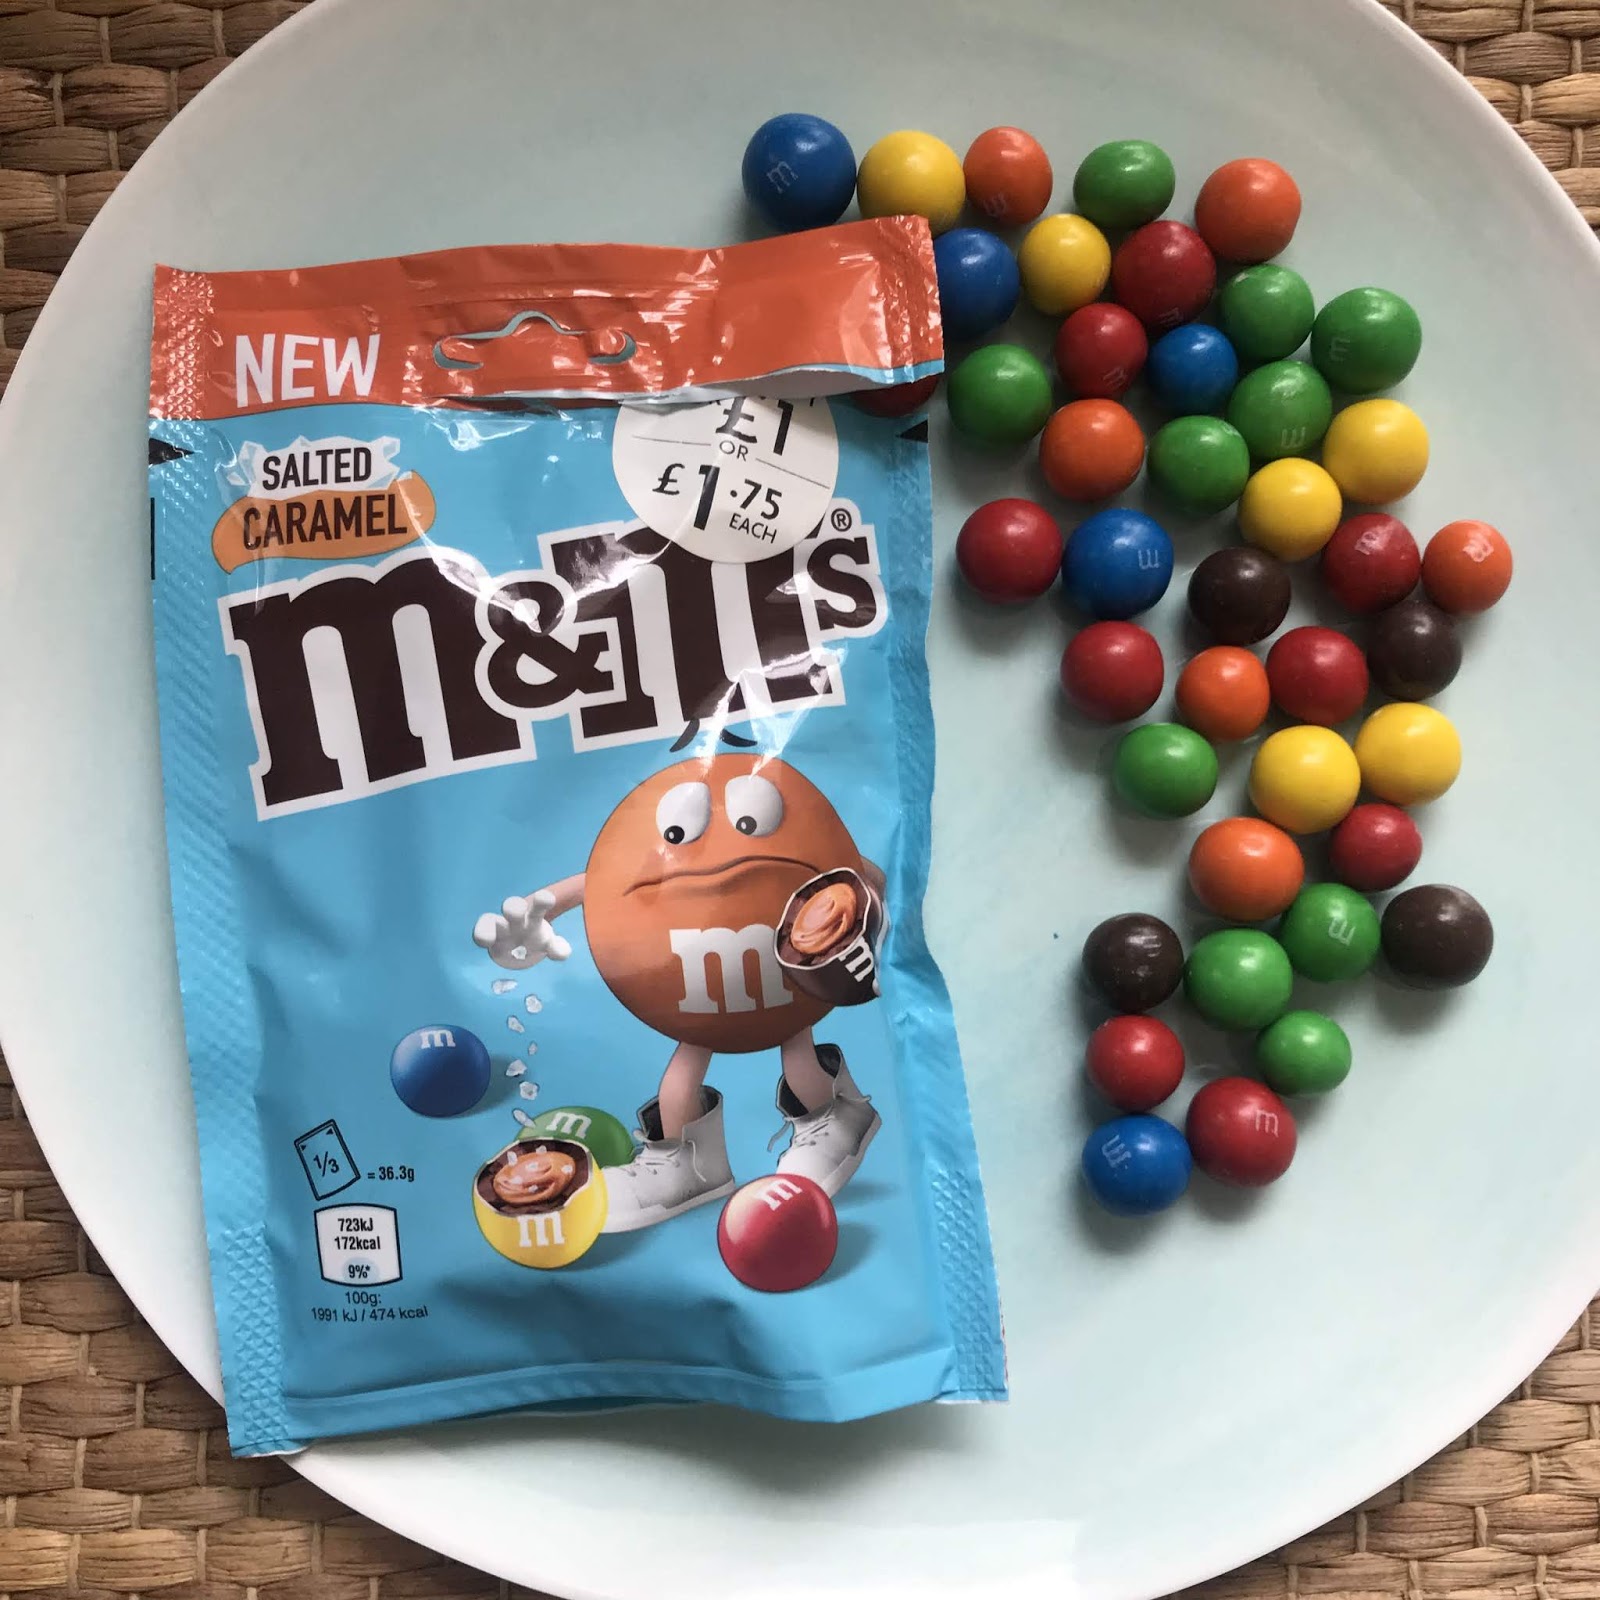 New Salted Caramel M&Ms review! 